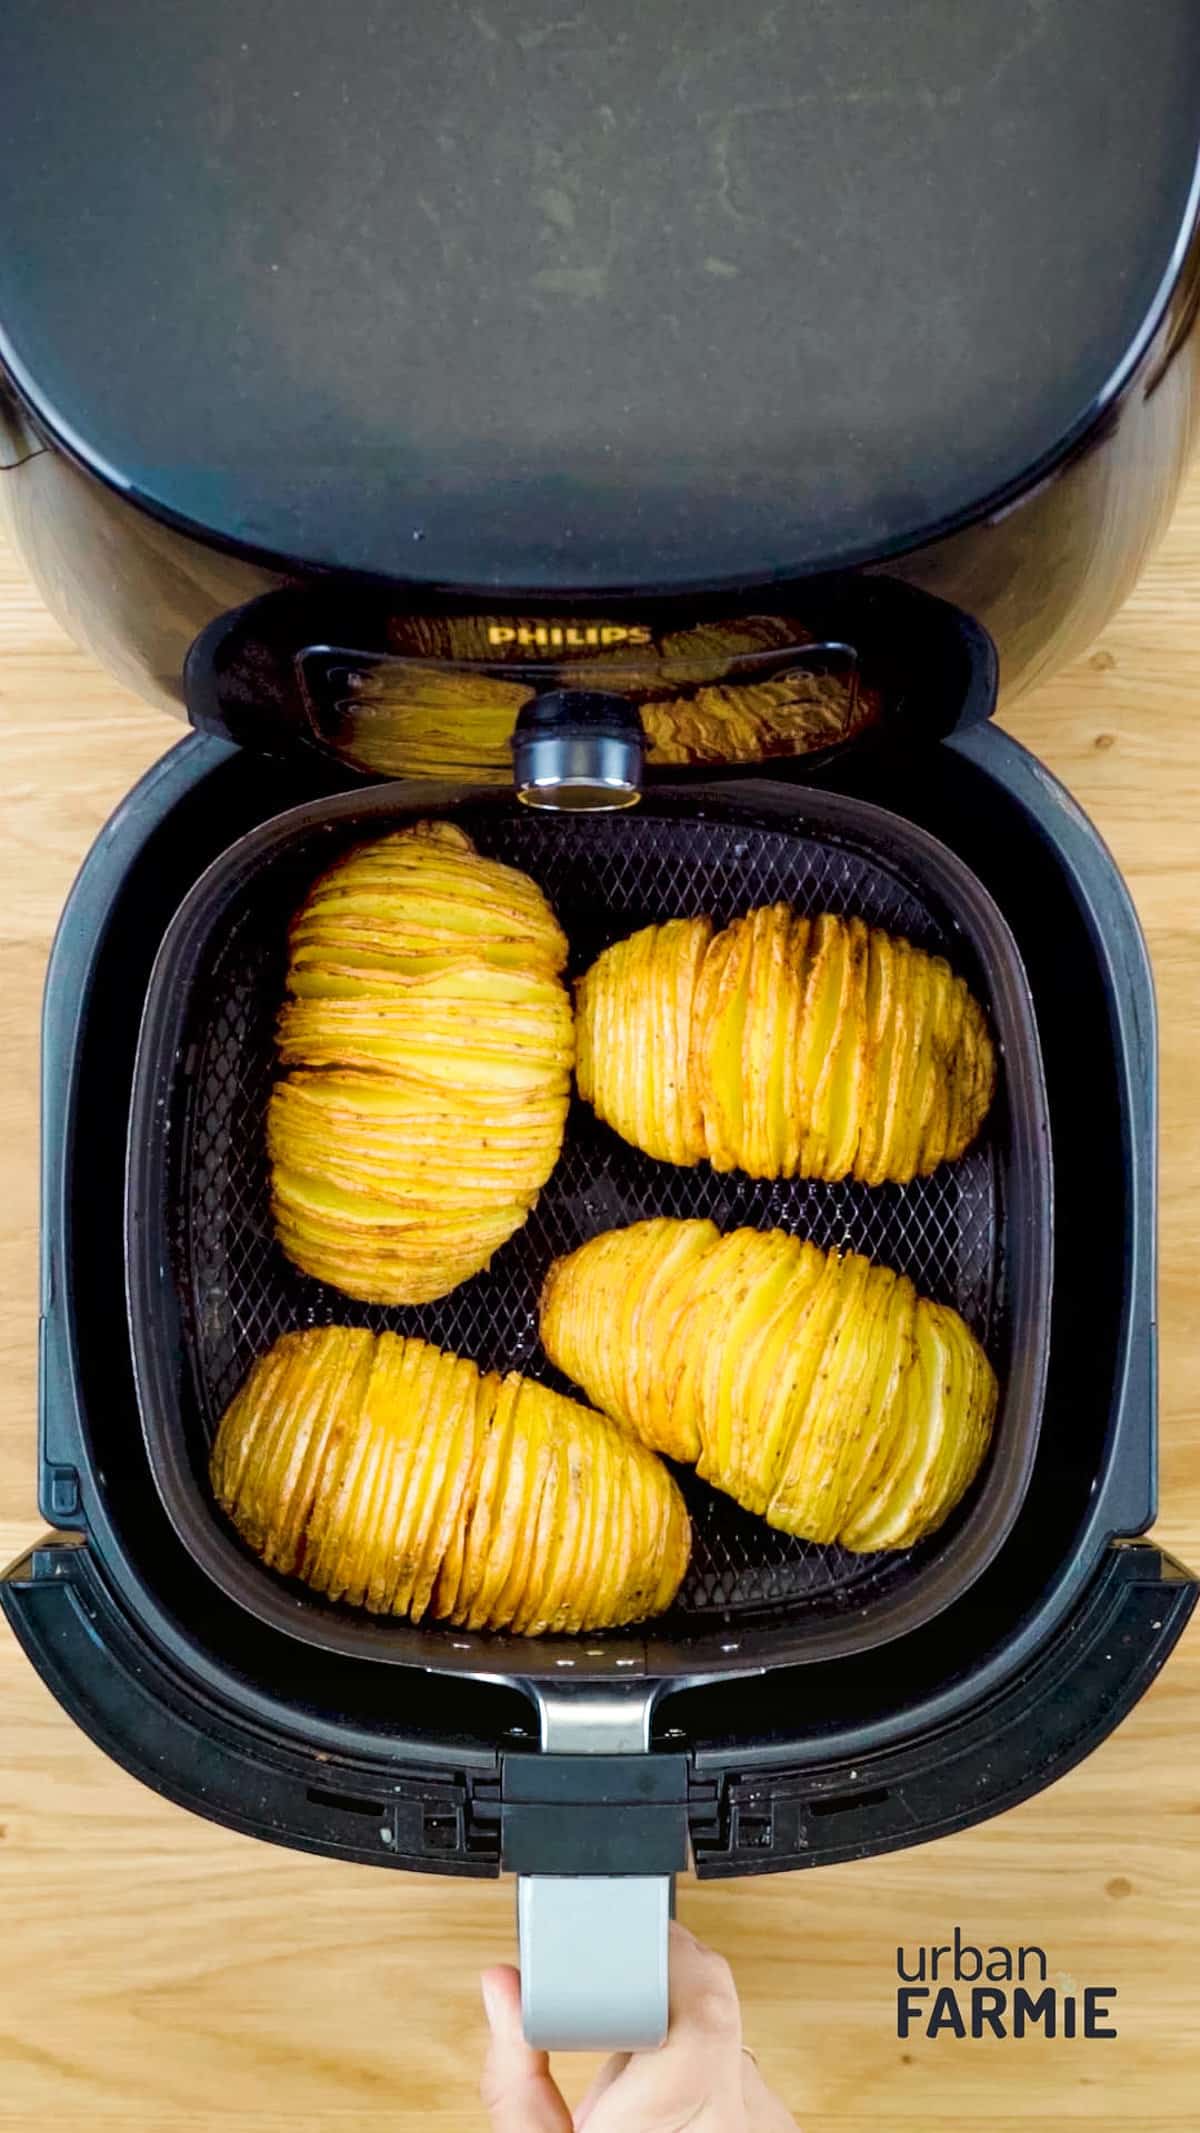 An image of air fried hasselback potatoes.